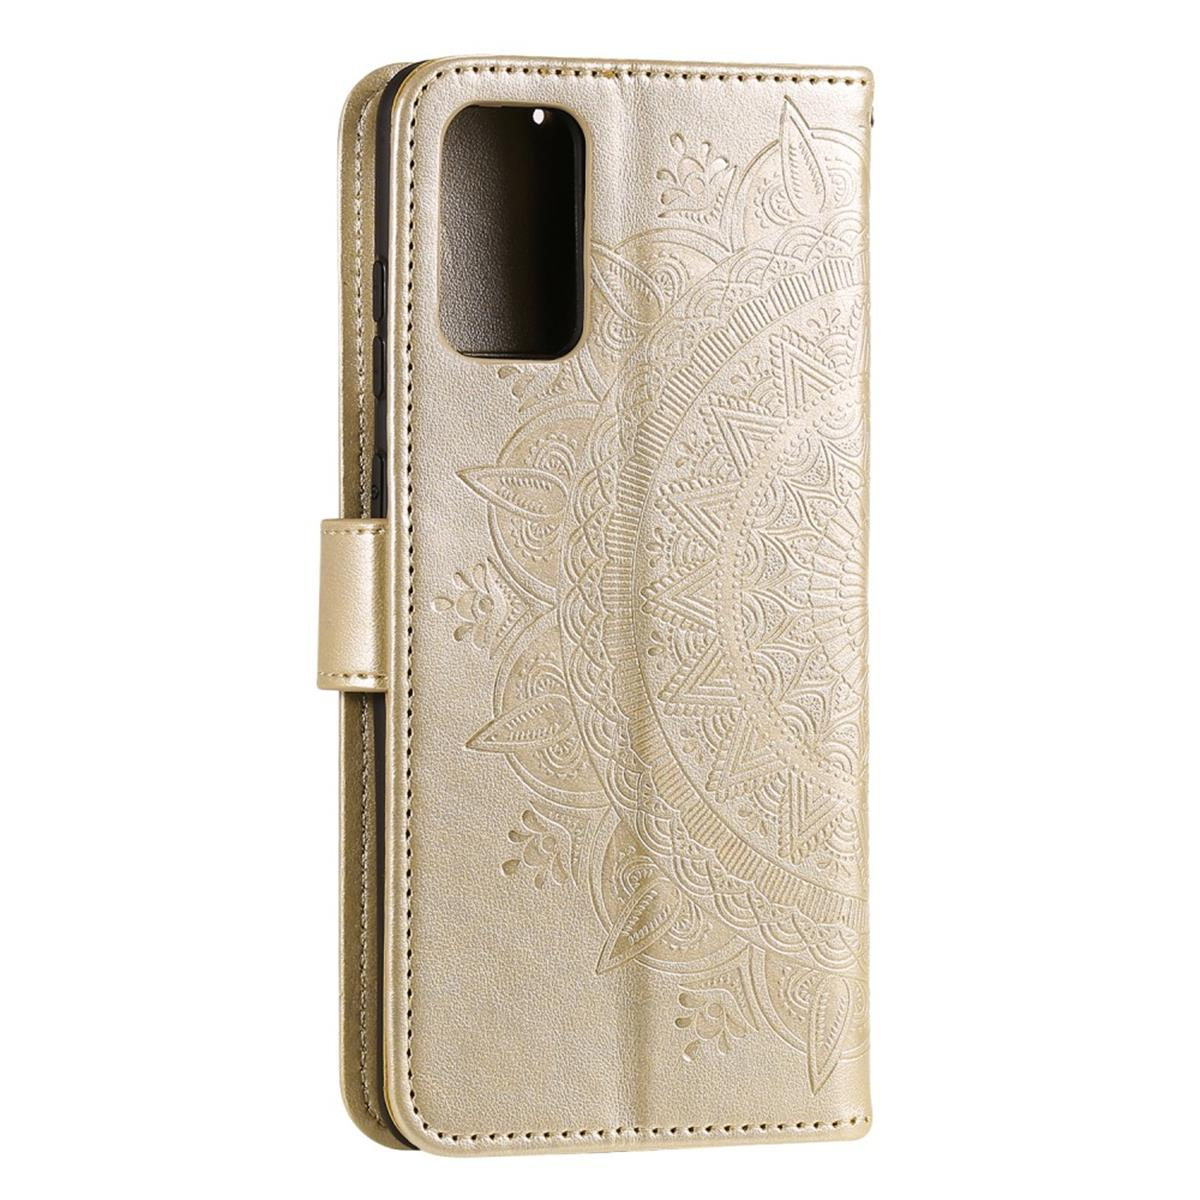 COVERKINGZ Klapphülle mit Y5p, Huawei, Bookcover, Muster, Gold Mandala